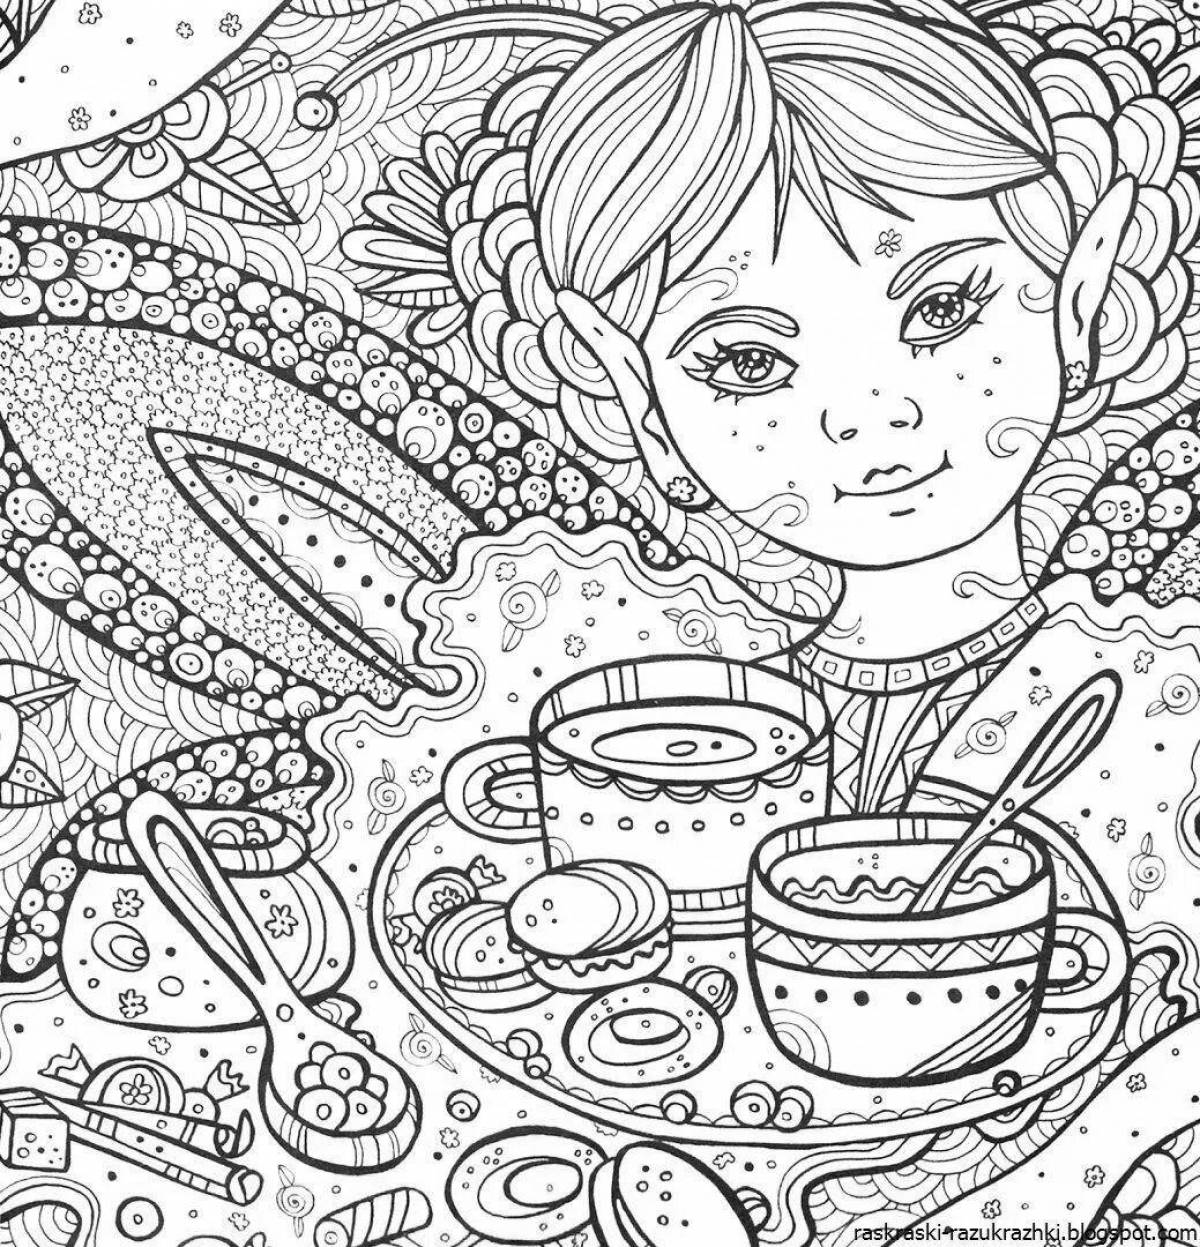 A fun anti-stress coloring book for 8 year olds